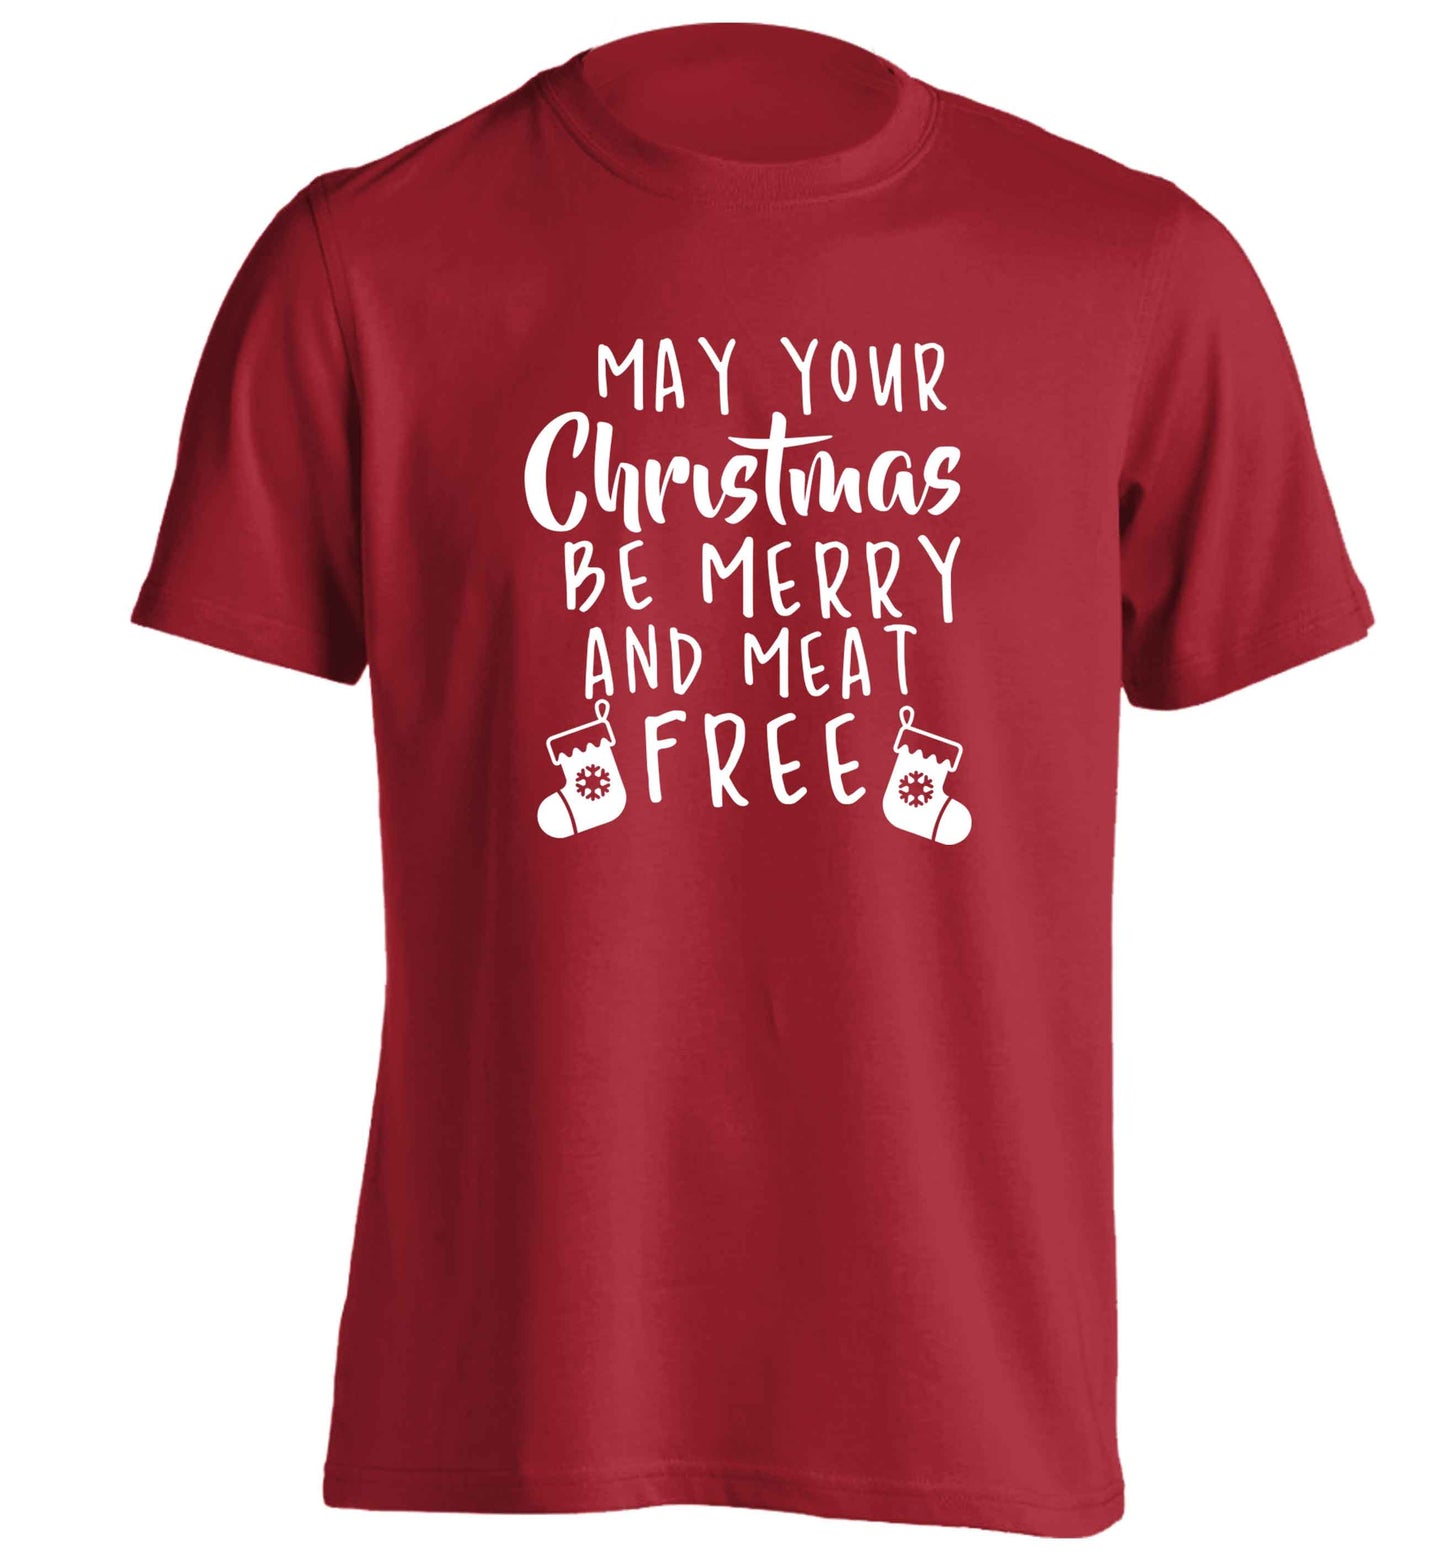 May your Christmas be merry and meat free adults unisex red Tshirt 2XL